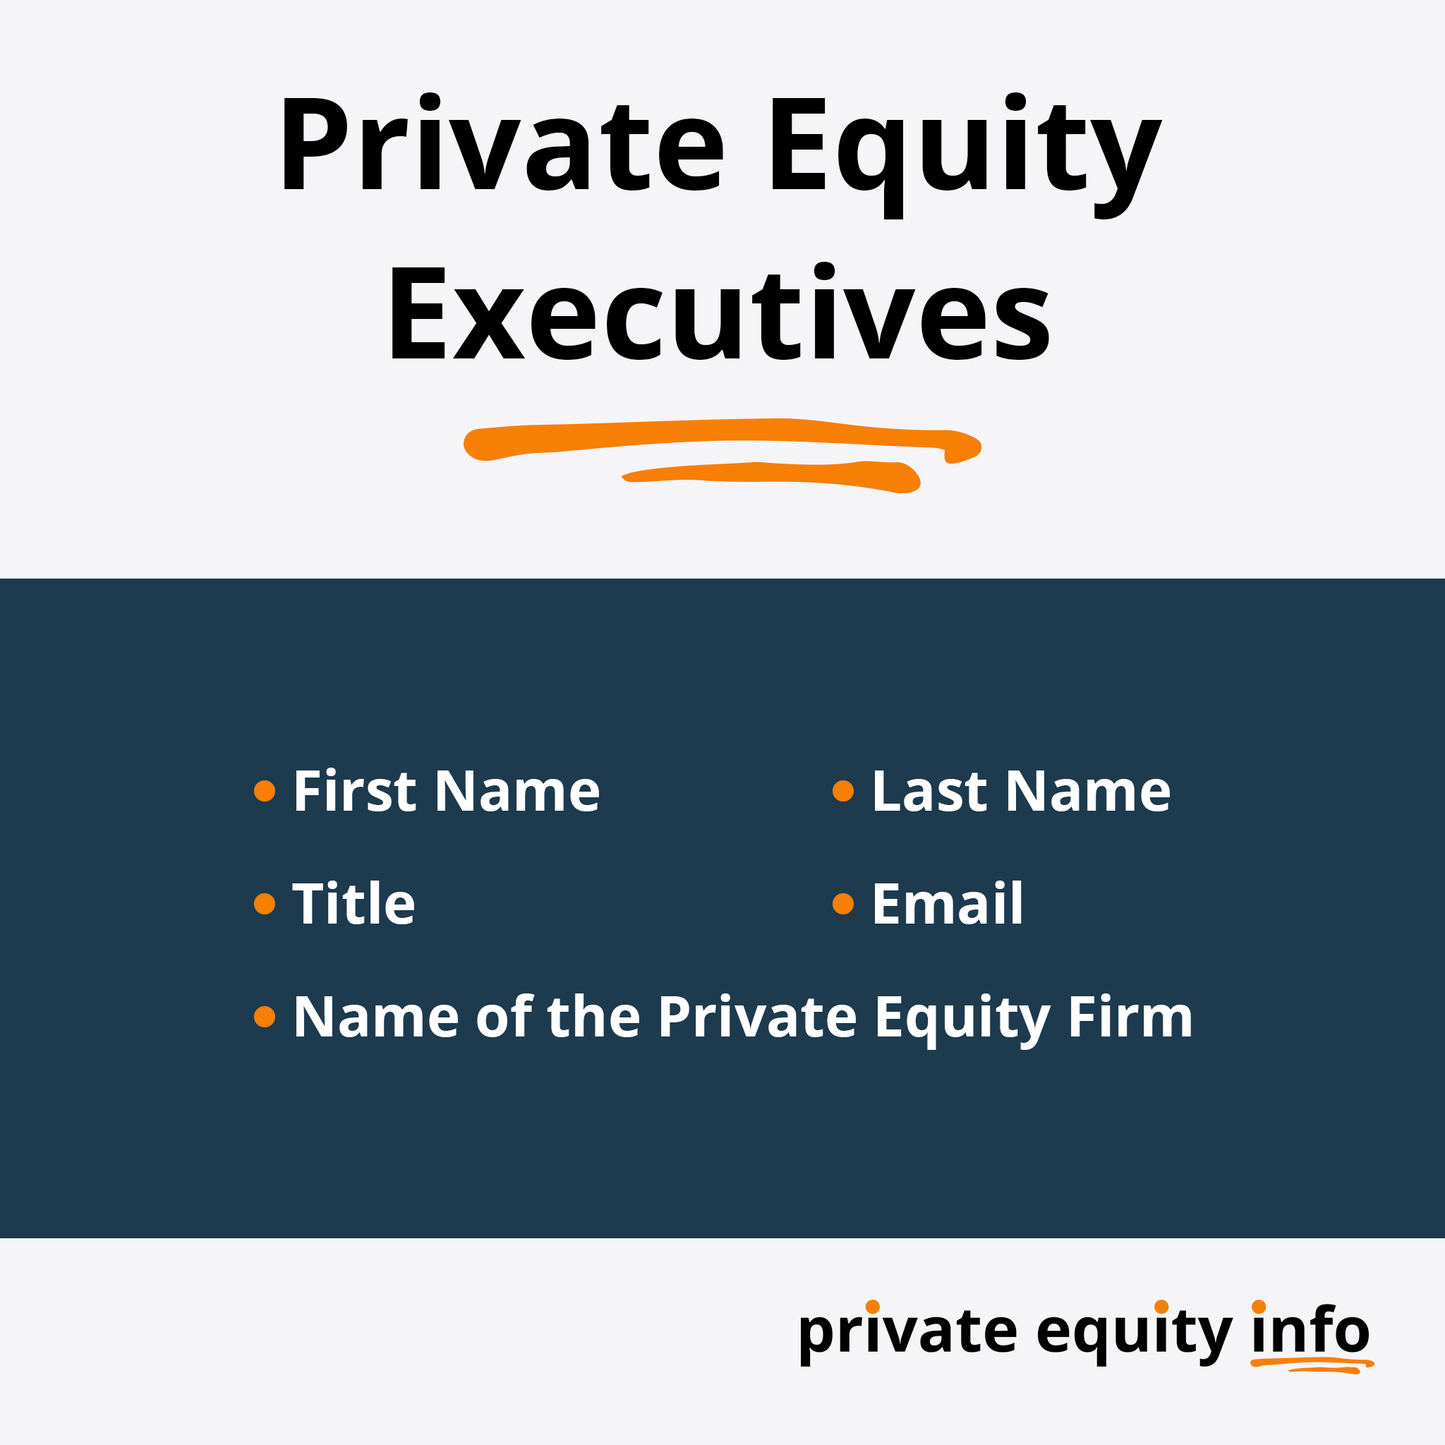 Private Equity Firms in Illinois